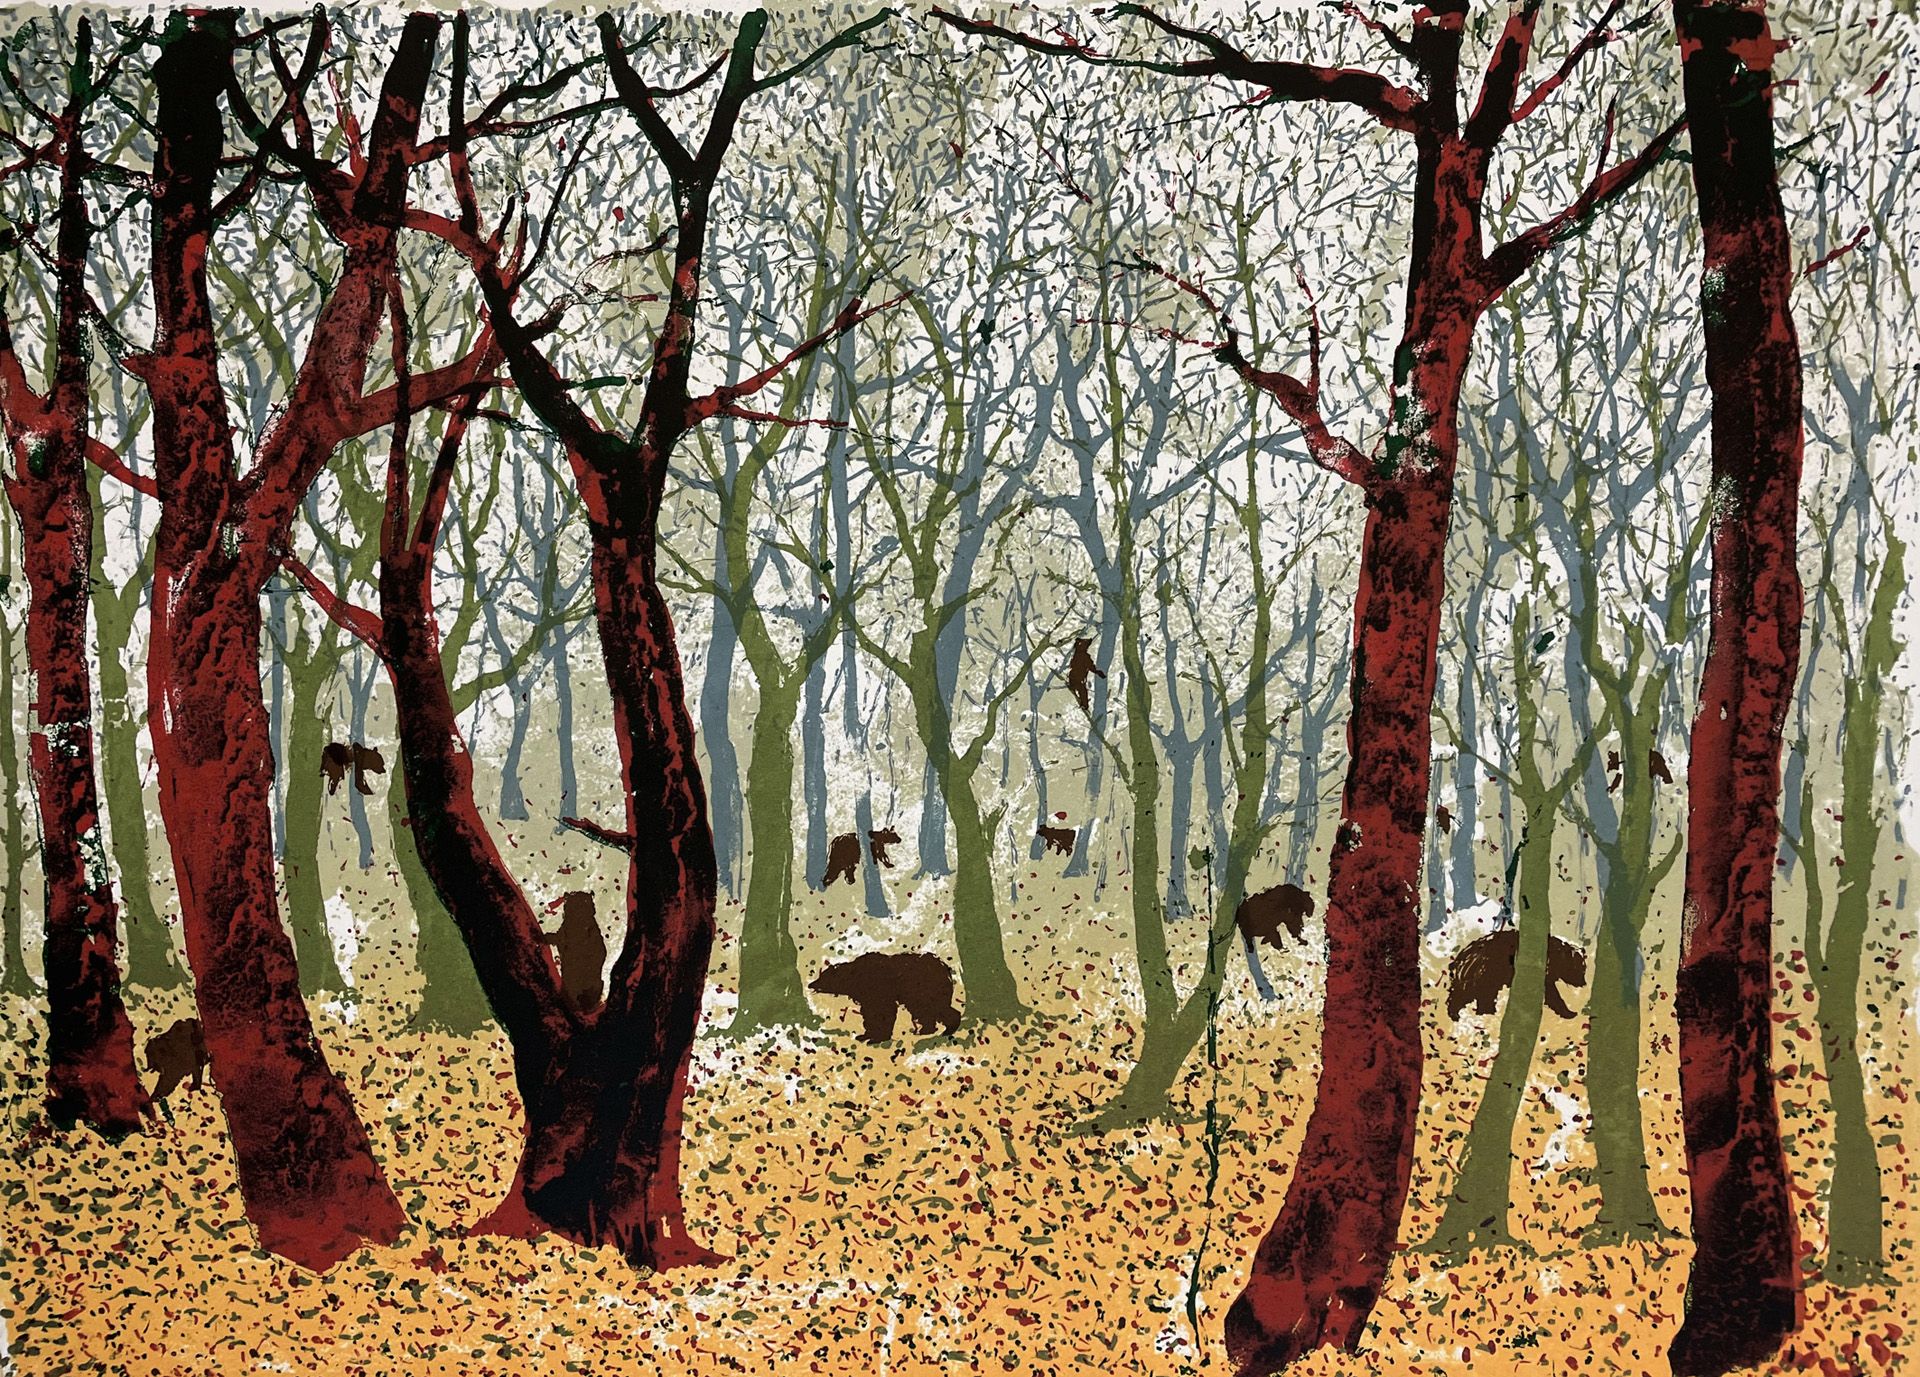 Bears in the Woods by Tim Southall